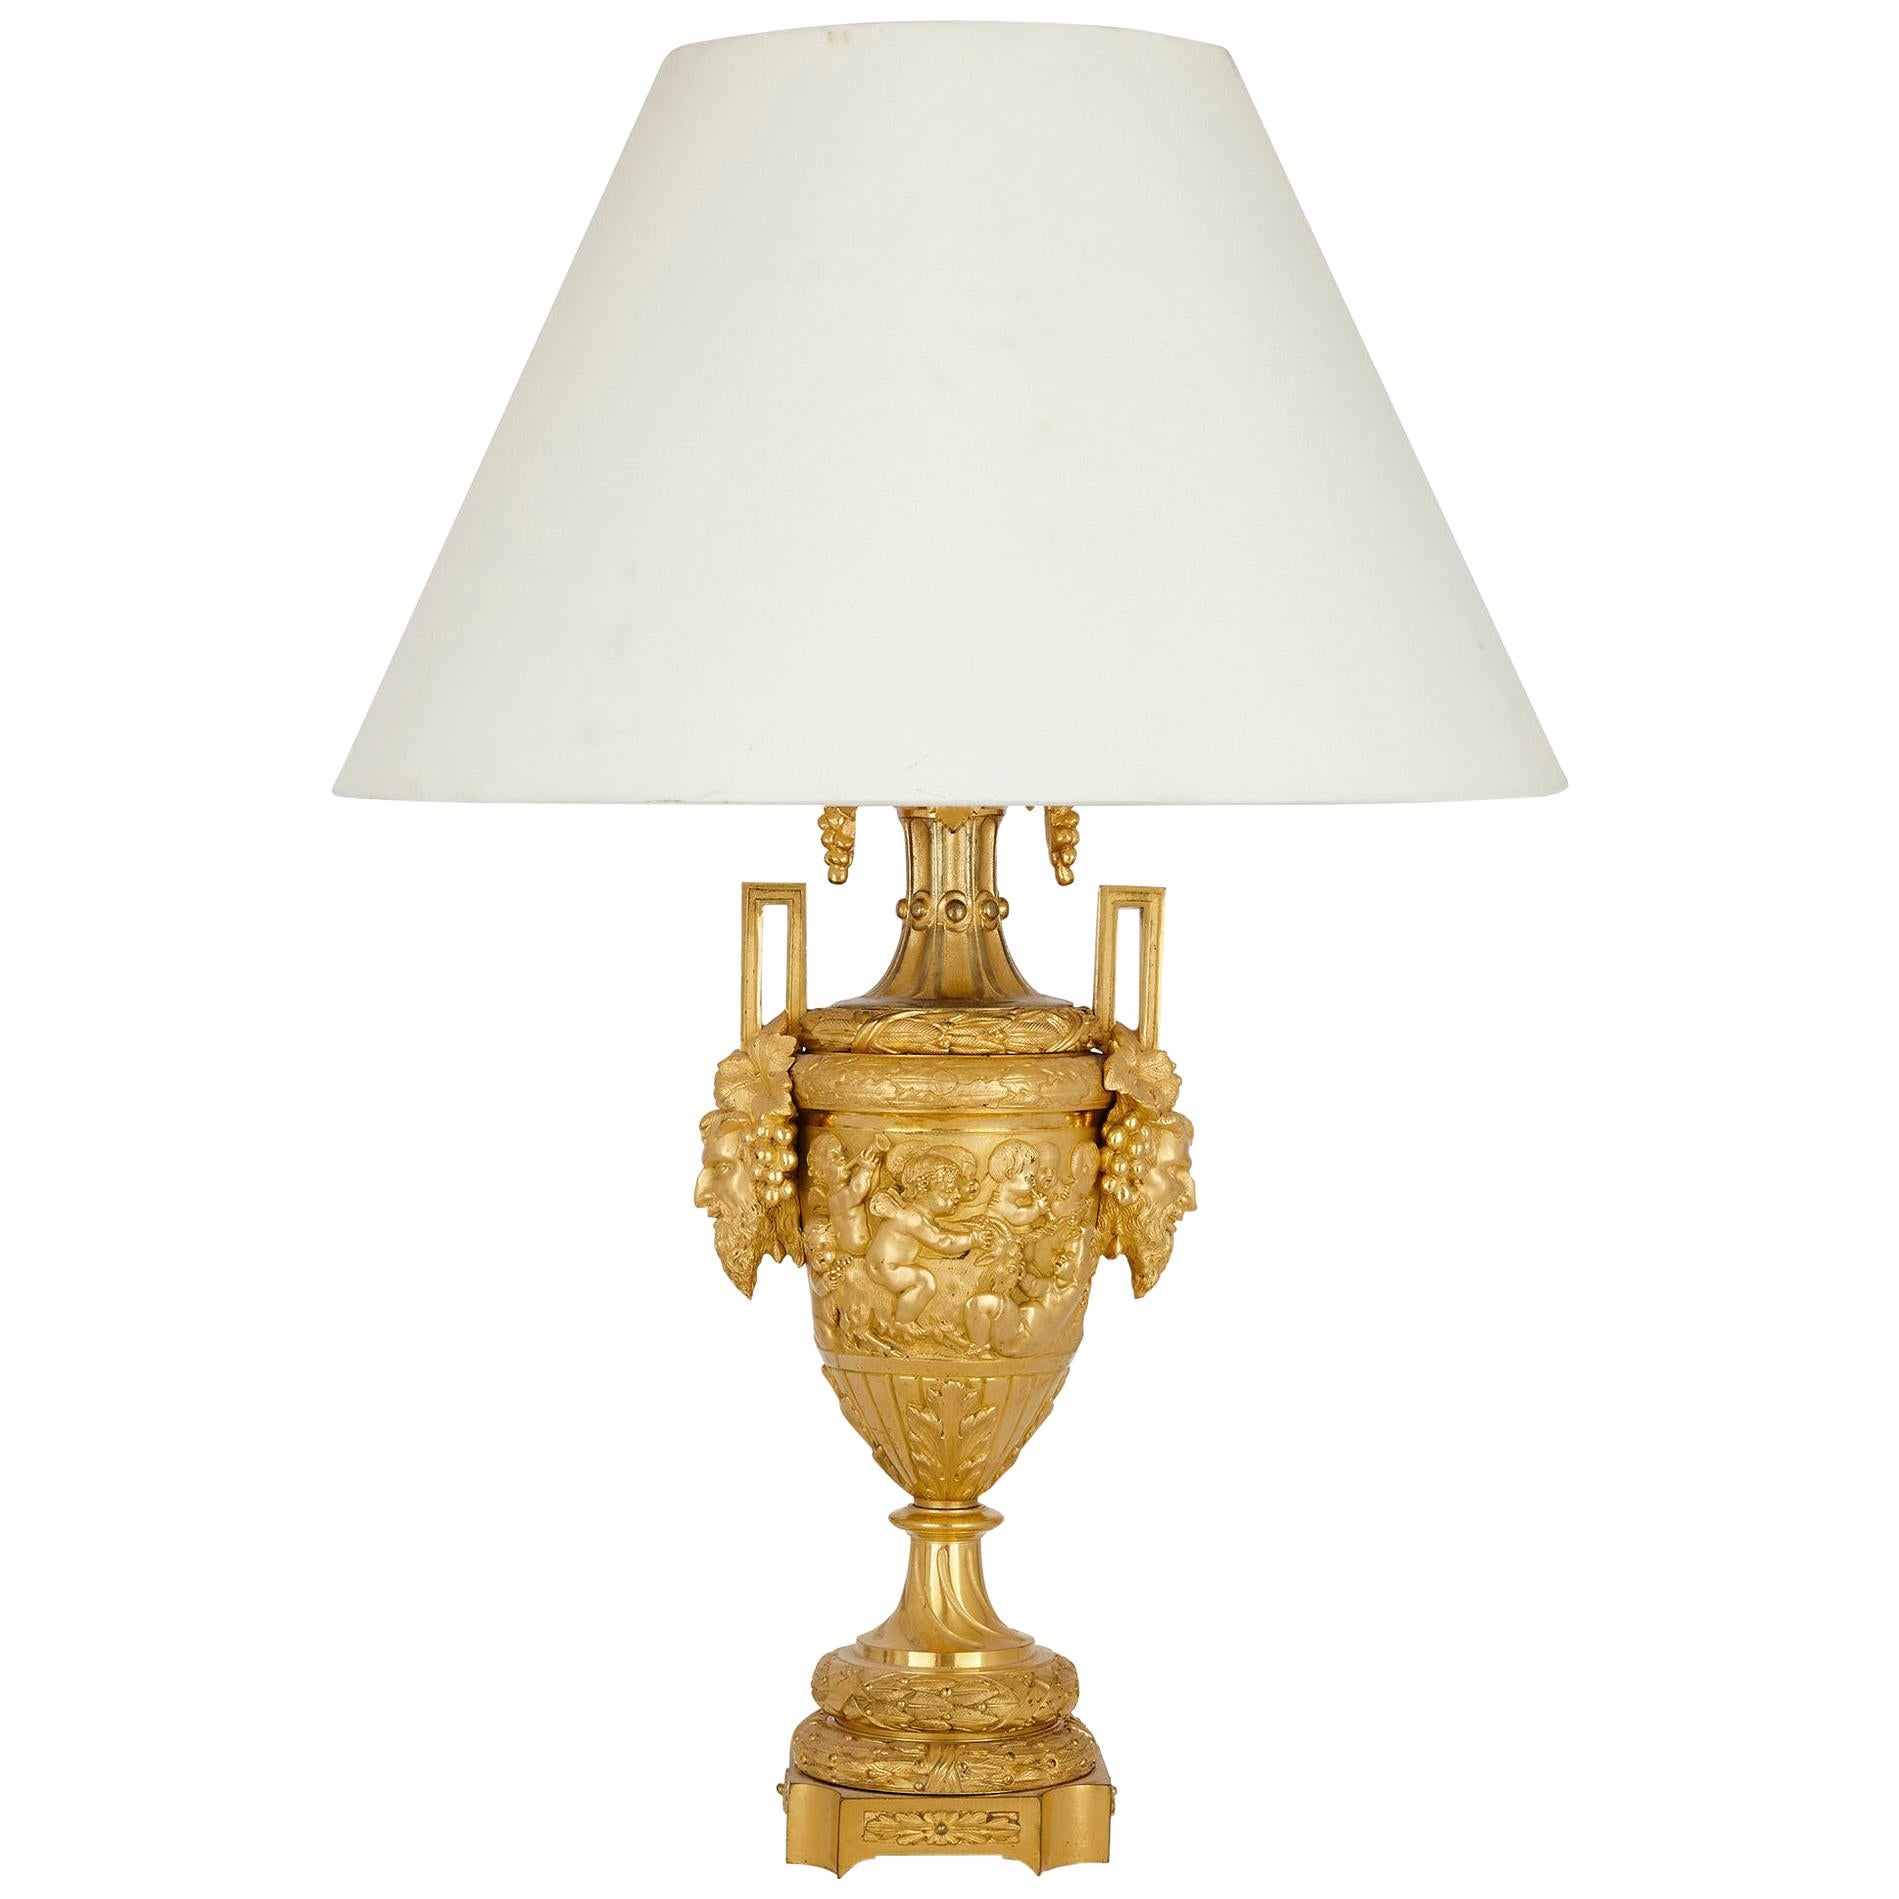 Gilt Bronze Table Lamp in the Rococo Style